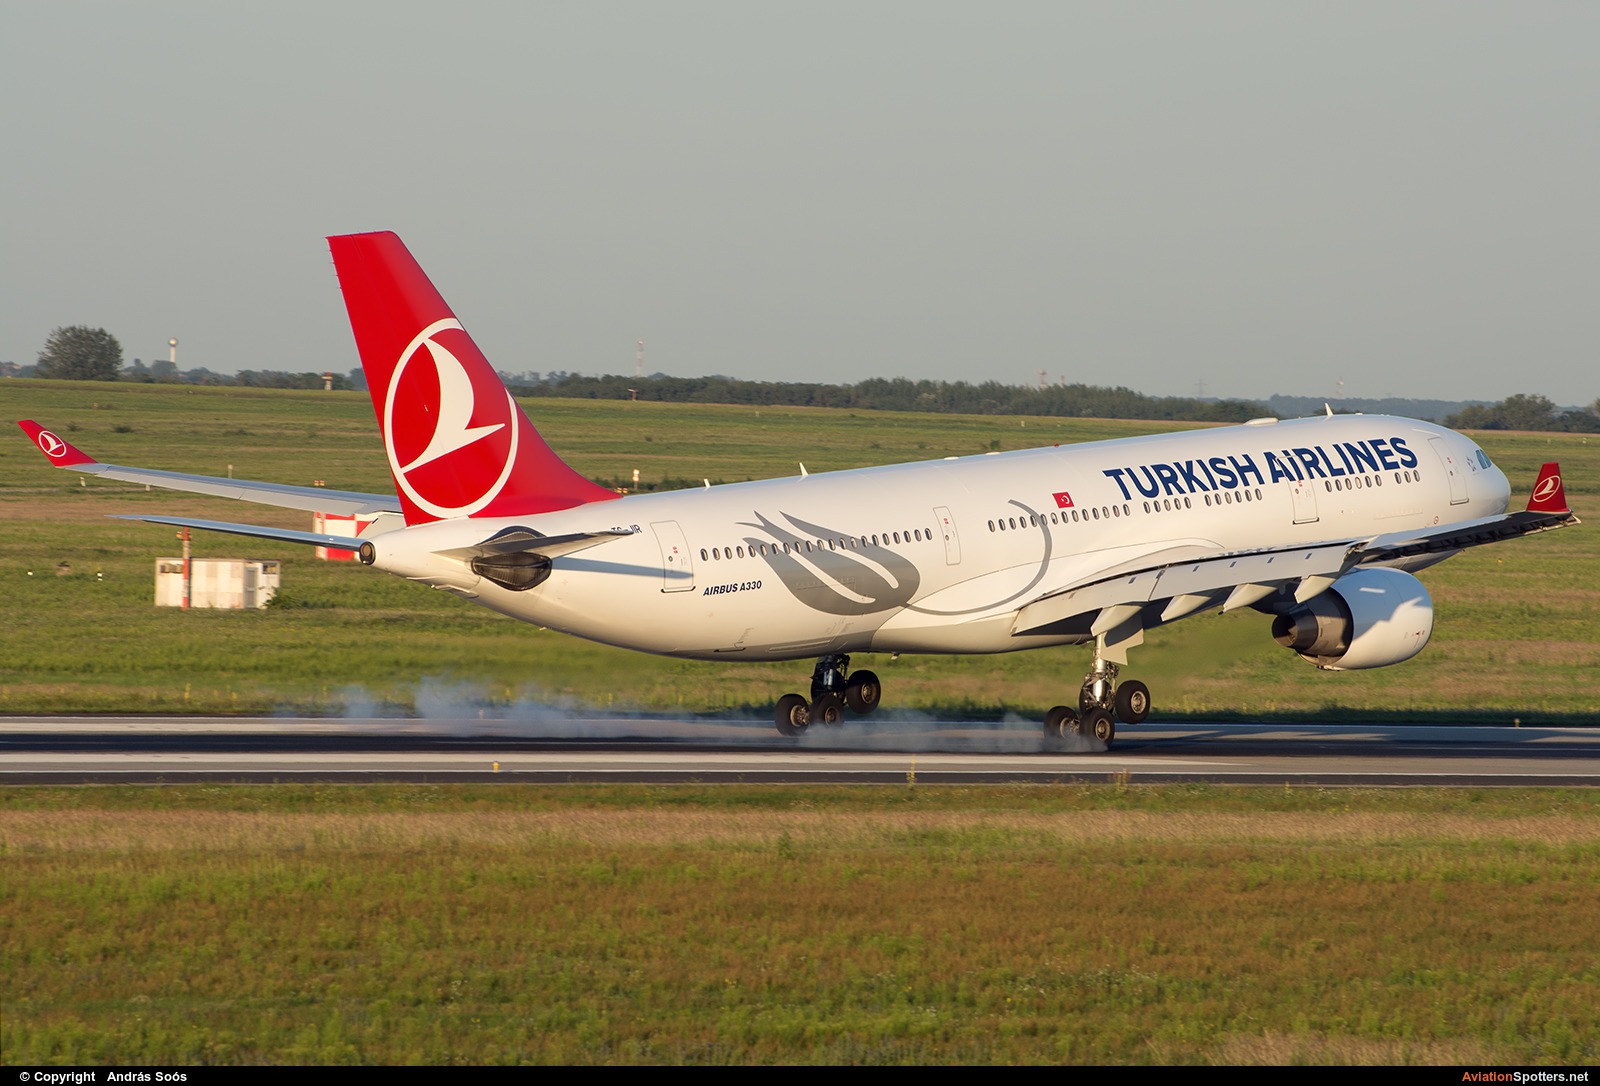 Turkish Airlines  -  A330-200  (TC-JIR) By András Soós (sas1965)